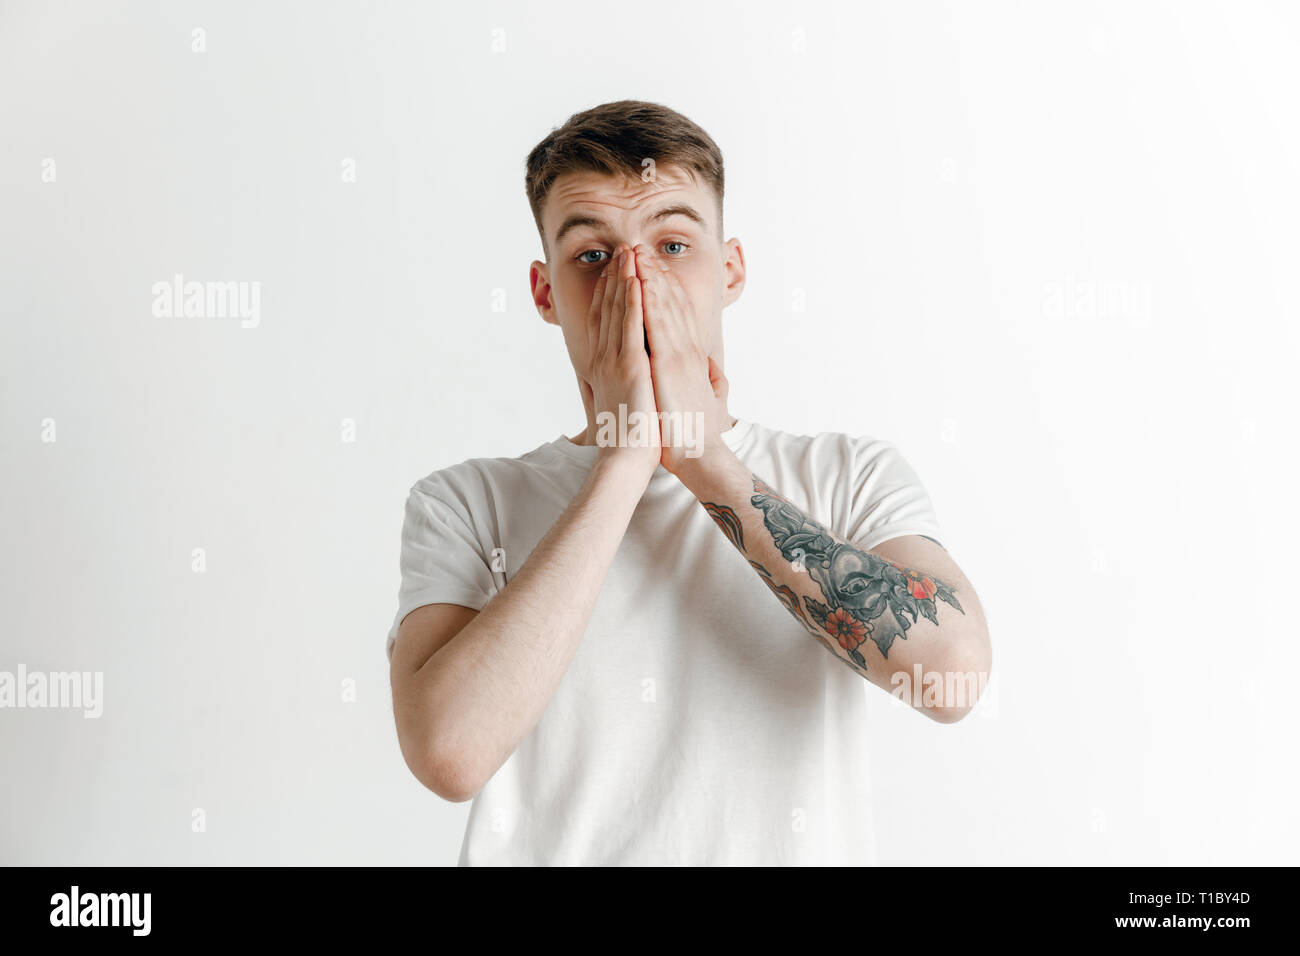 Why is that. Beautiful male half-length portrait isolated on gray studio backgroud. Young emotional surprised, frustrated and bewildered man. Human emotions, facial expression concept. Stock Photo